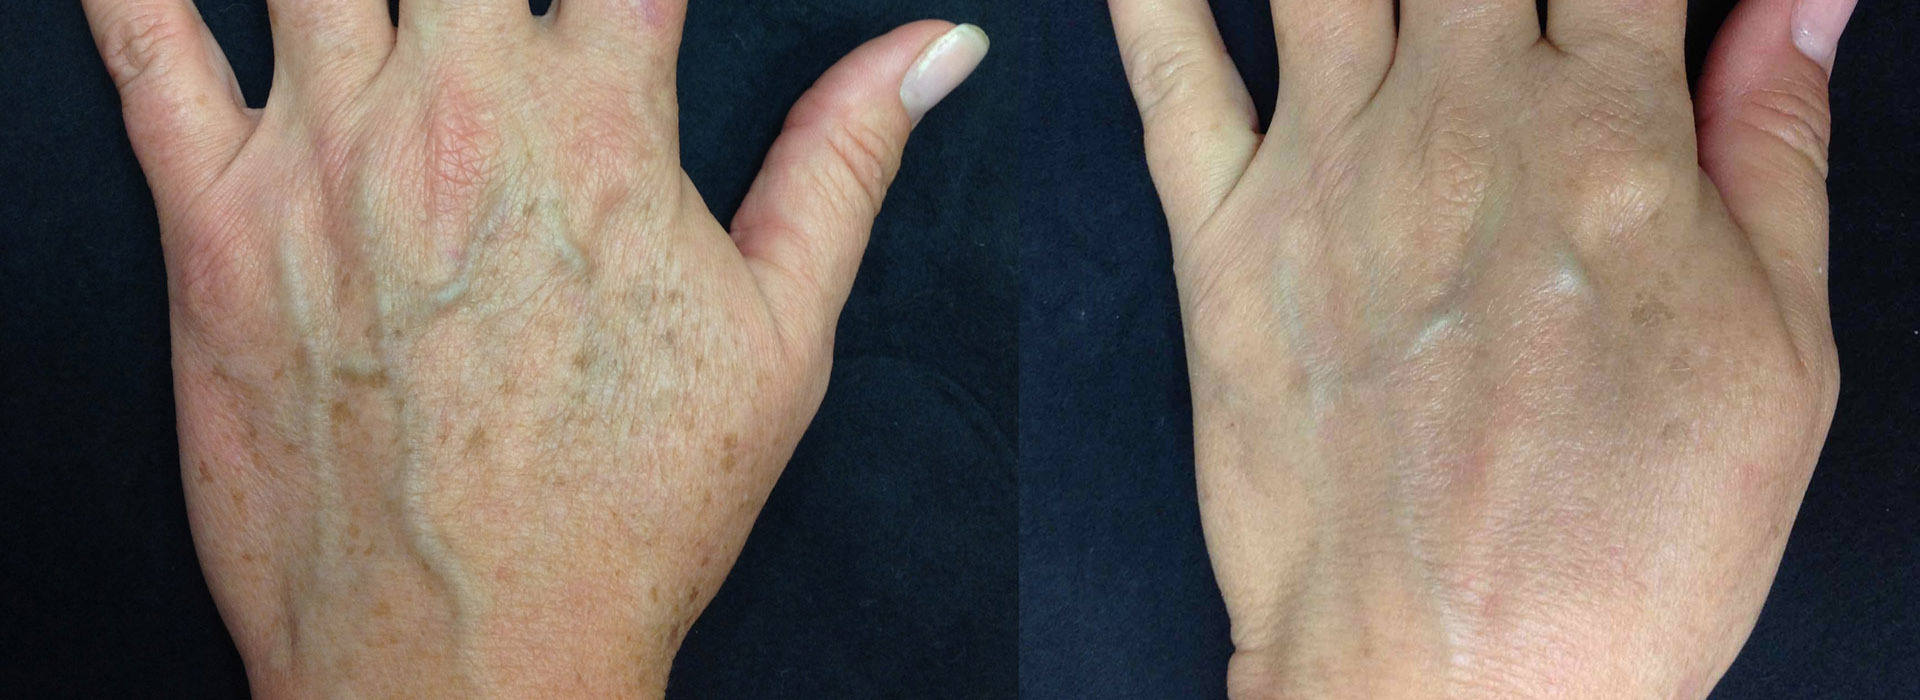 Hand skin rejuvenation before and after results image